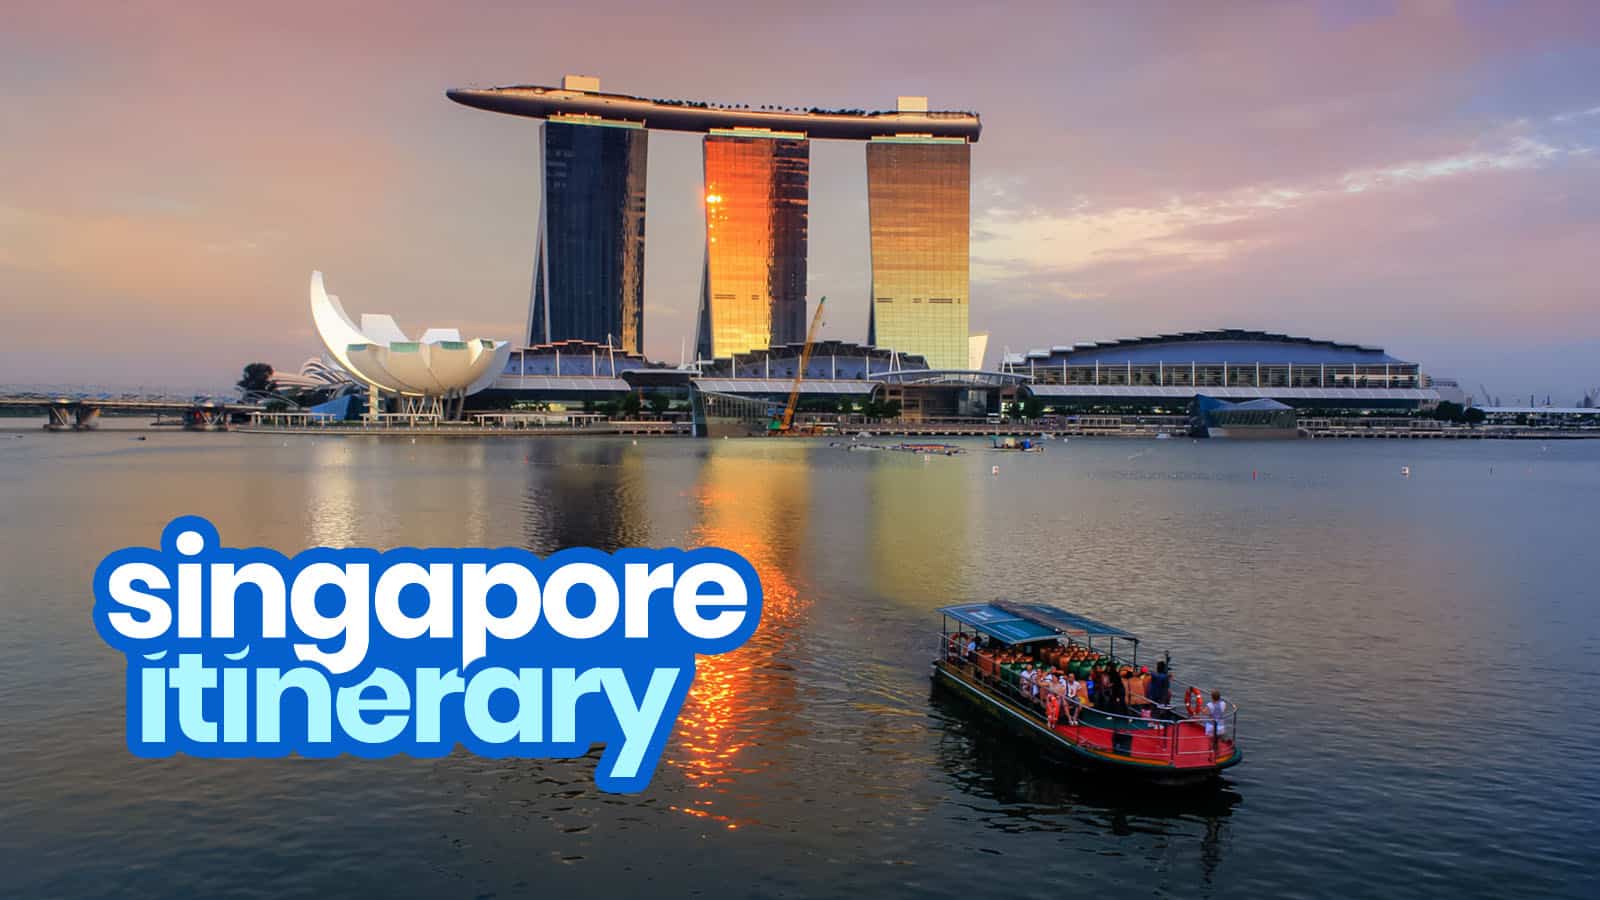 SINGAPORE ITINERARY: 14 Best Things to Do & Places to Visit